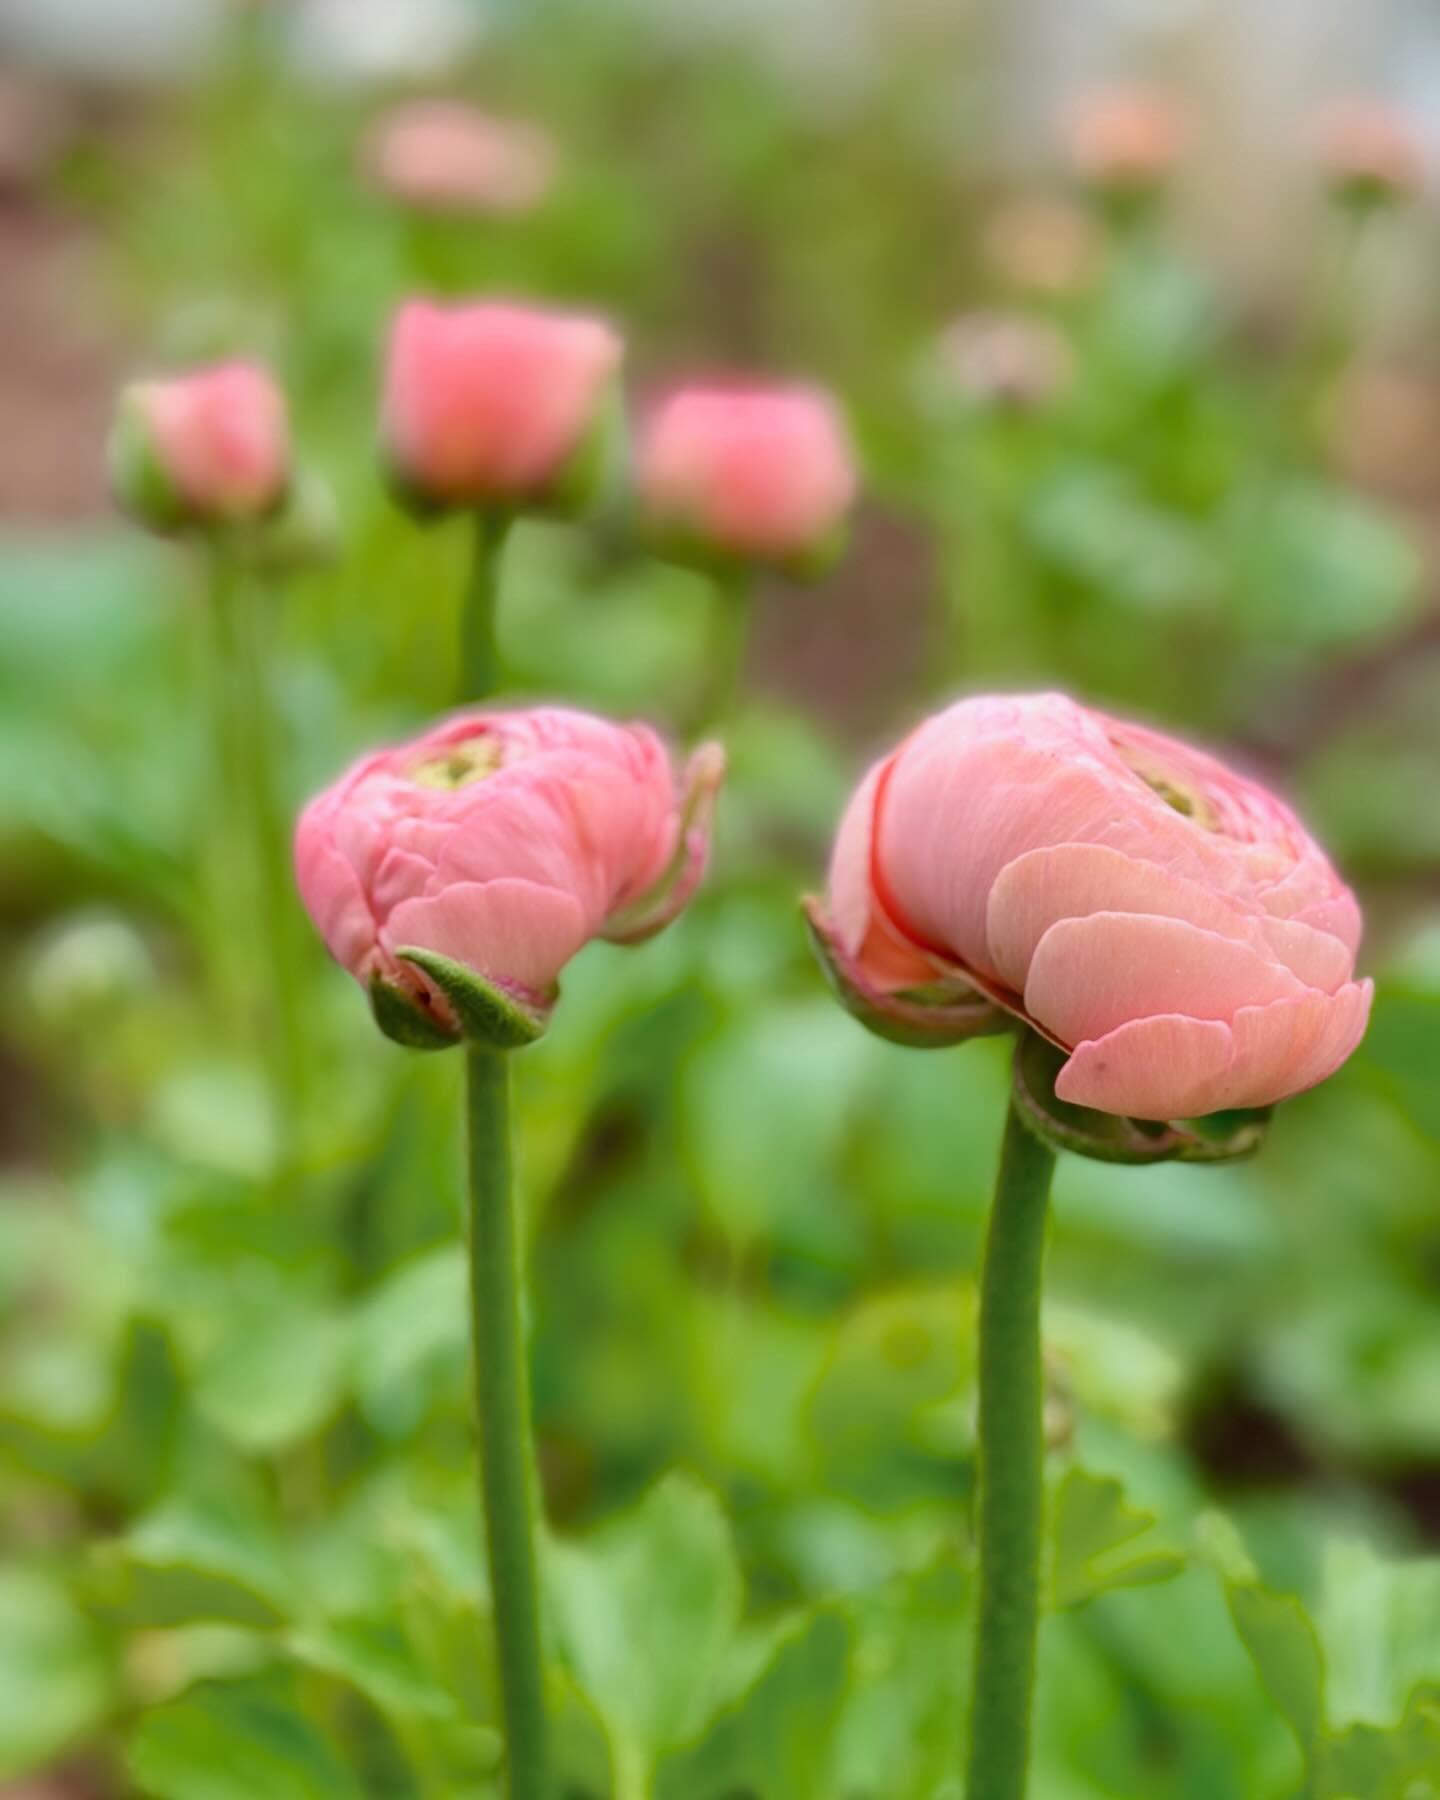 Ranunculus. The roses of spring. They are growing beautifully in the poly tunnel and greenhouses. Please DM us or give one of us a call if you would like some next week - we are all sold out this week! 

#ranunculus #bathflorist #flowerfarmer